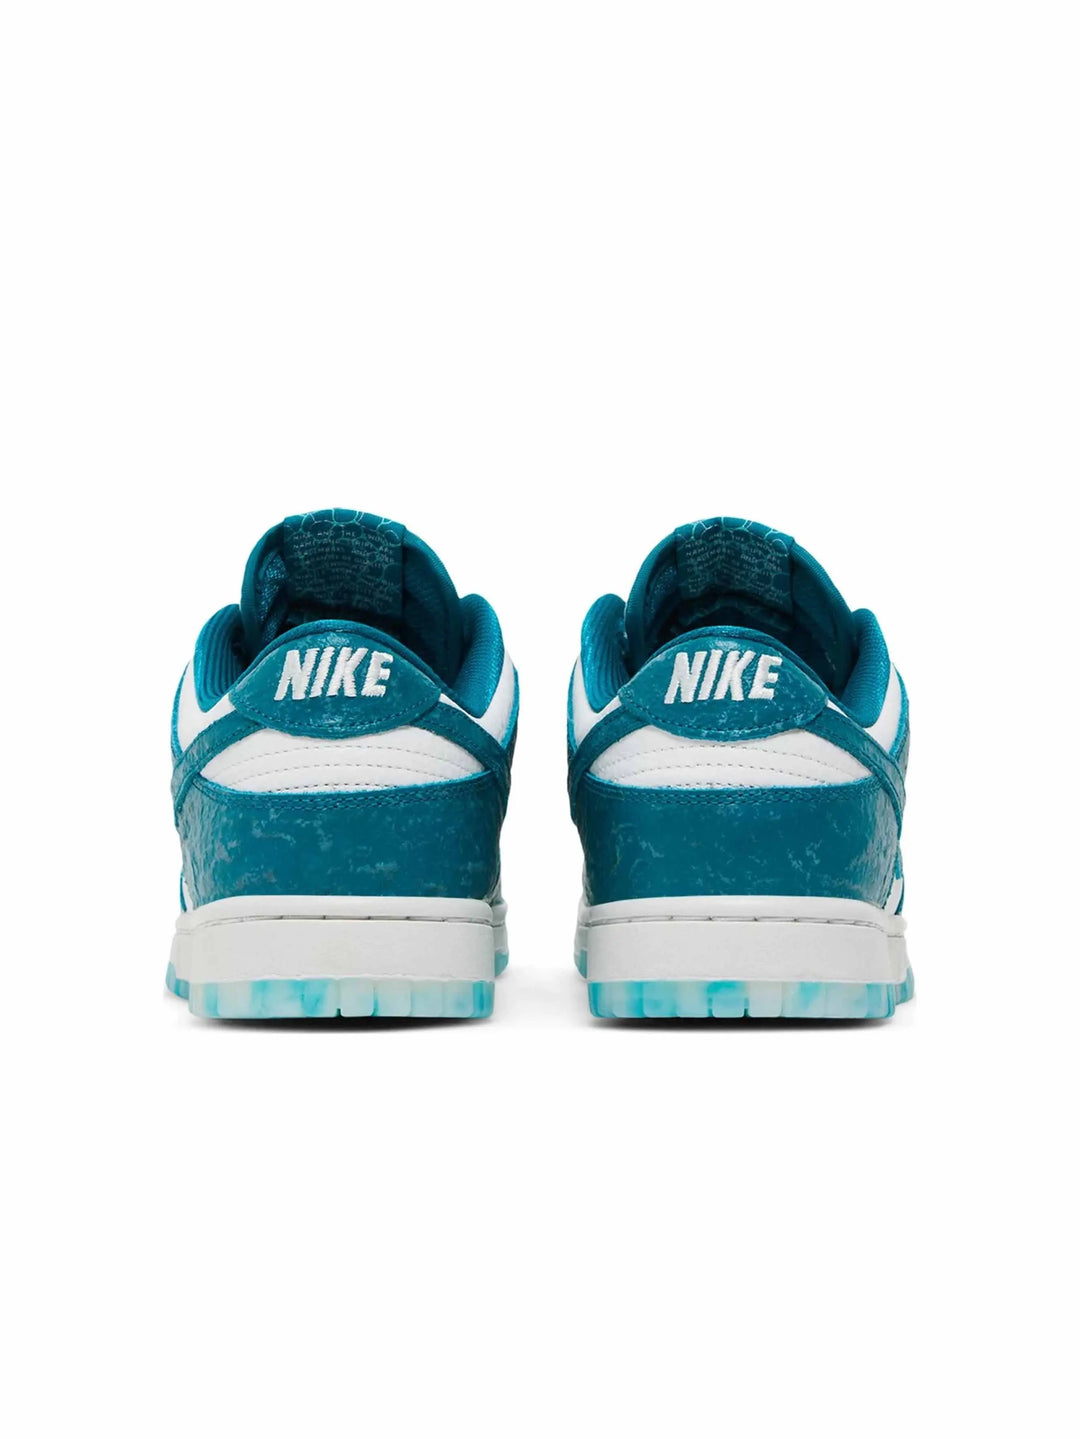 Nike Dunk Low Ocean (W) in Auckland, New Zealand - Shop name